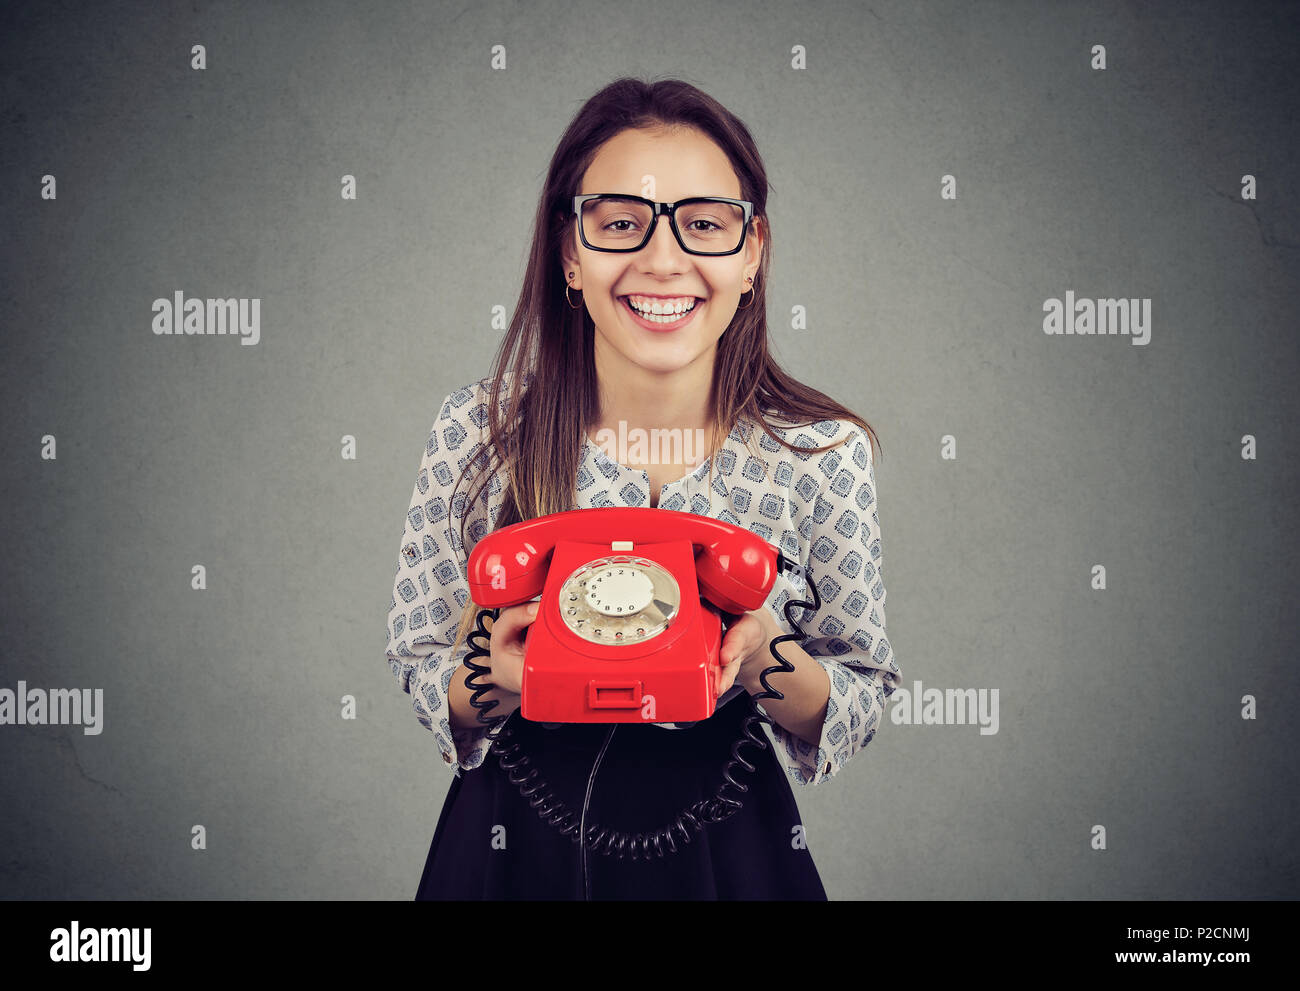 Cute happy woman with retro style red telephone Stock Photo